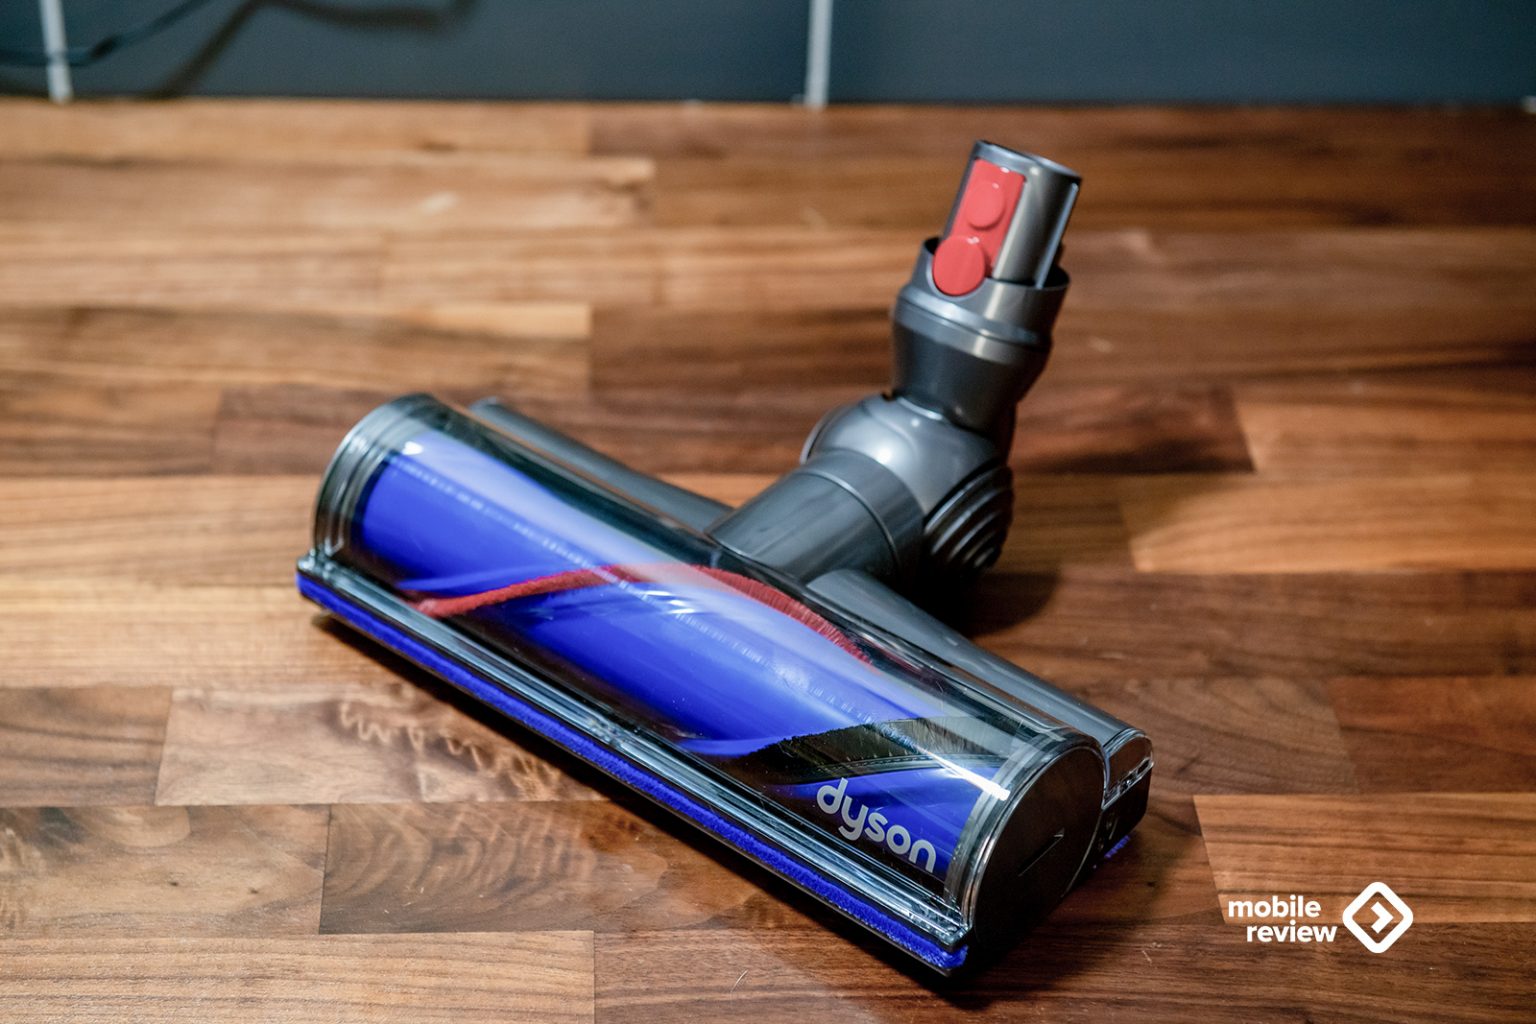 Dyson absolute 2. Dyson v12 detect Slim absolute. Dyson v12 detect Slim. Dyson v15 датчик пыли.